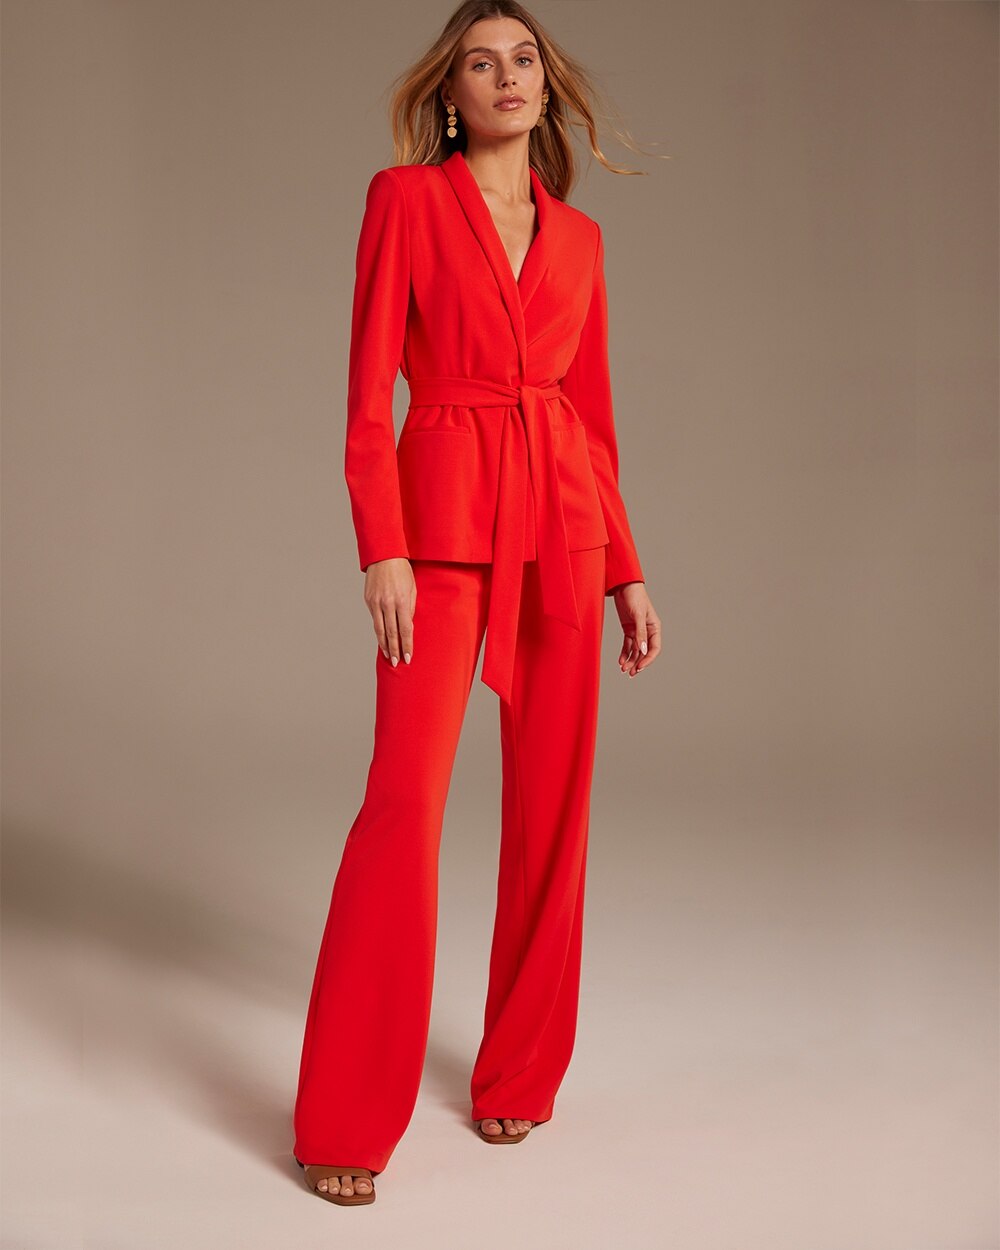 WHBM\u00AE Slip On Wide Leg Pant video preview image, click to start video